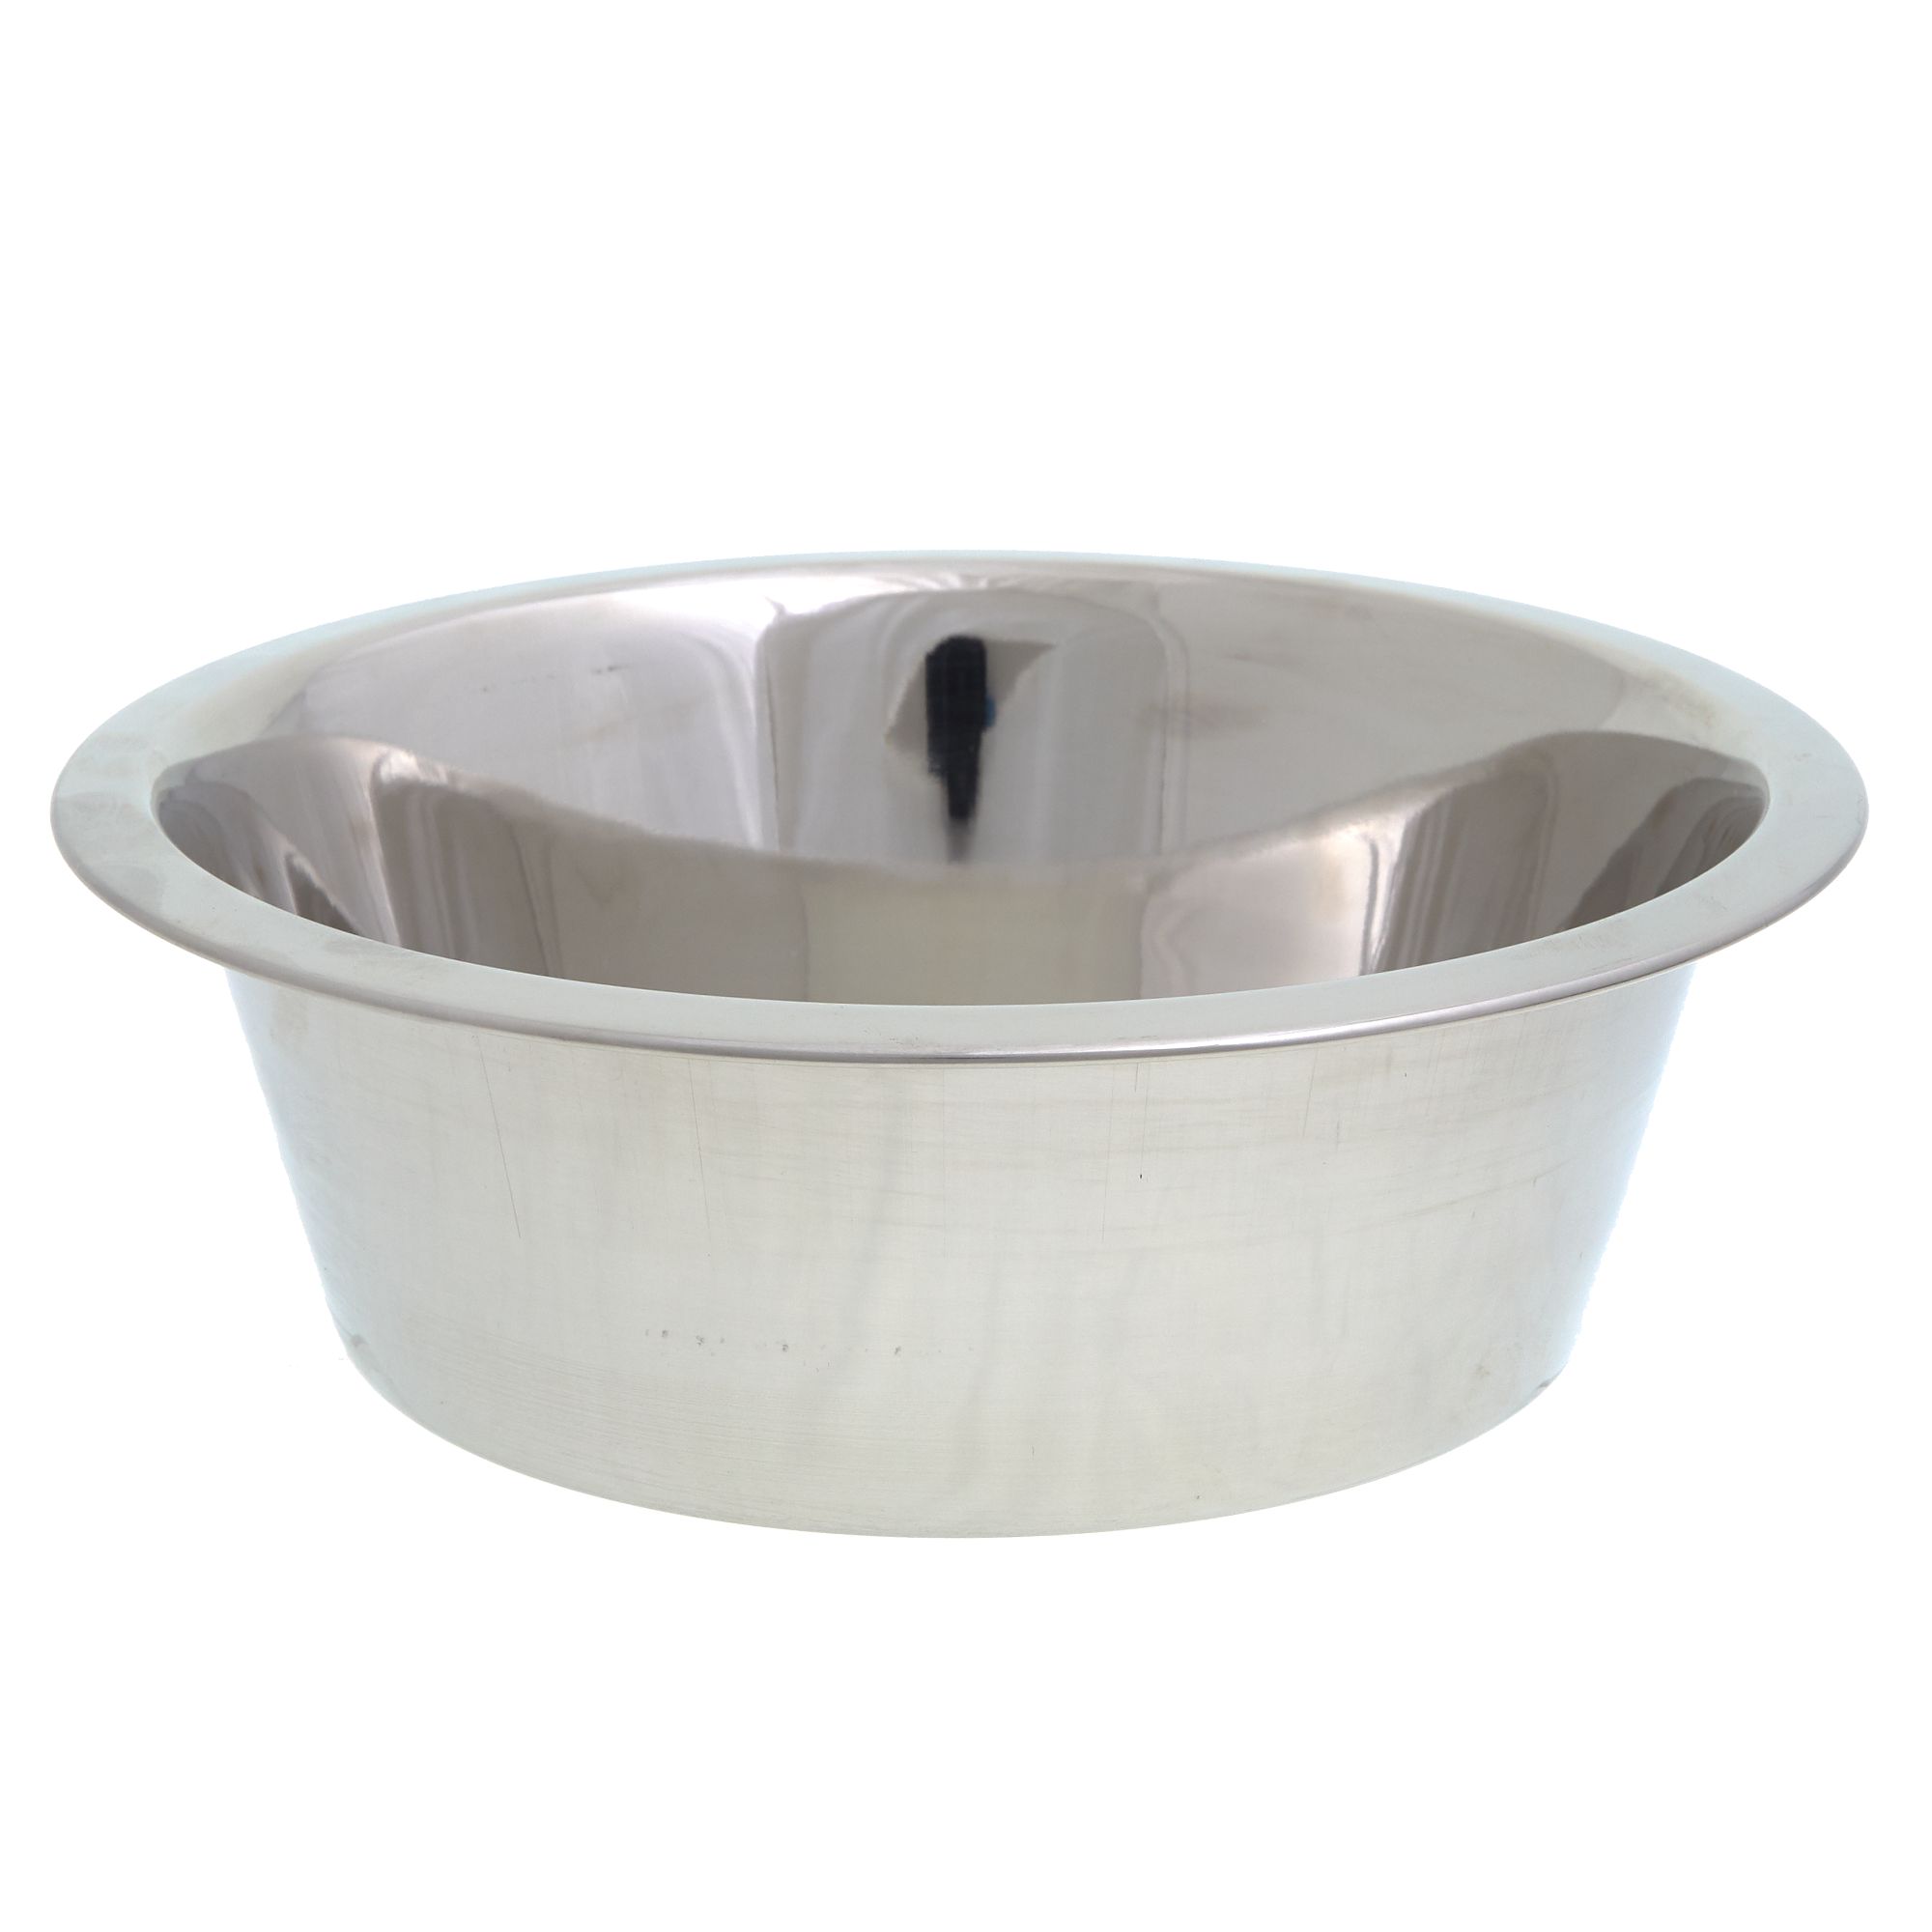 Deep Stainless Steel Anti-Slip Dog Cat Bowls with No-Spill and Non-Skid Rubber Bottom for Small/Medium/Large Dogs/Cats M JJYPET Pet Dog Bowls 2 Stainless Steel Dog Bowl Set 